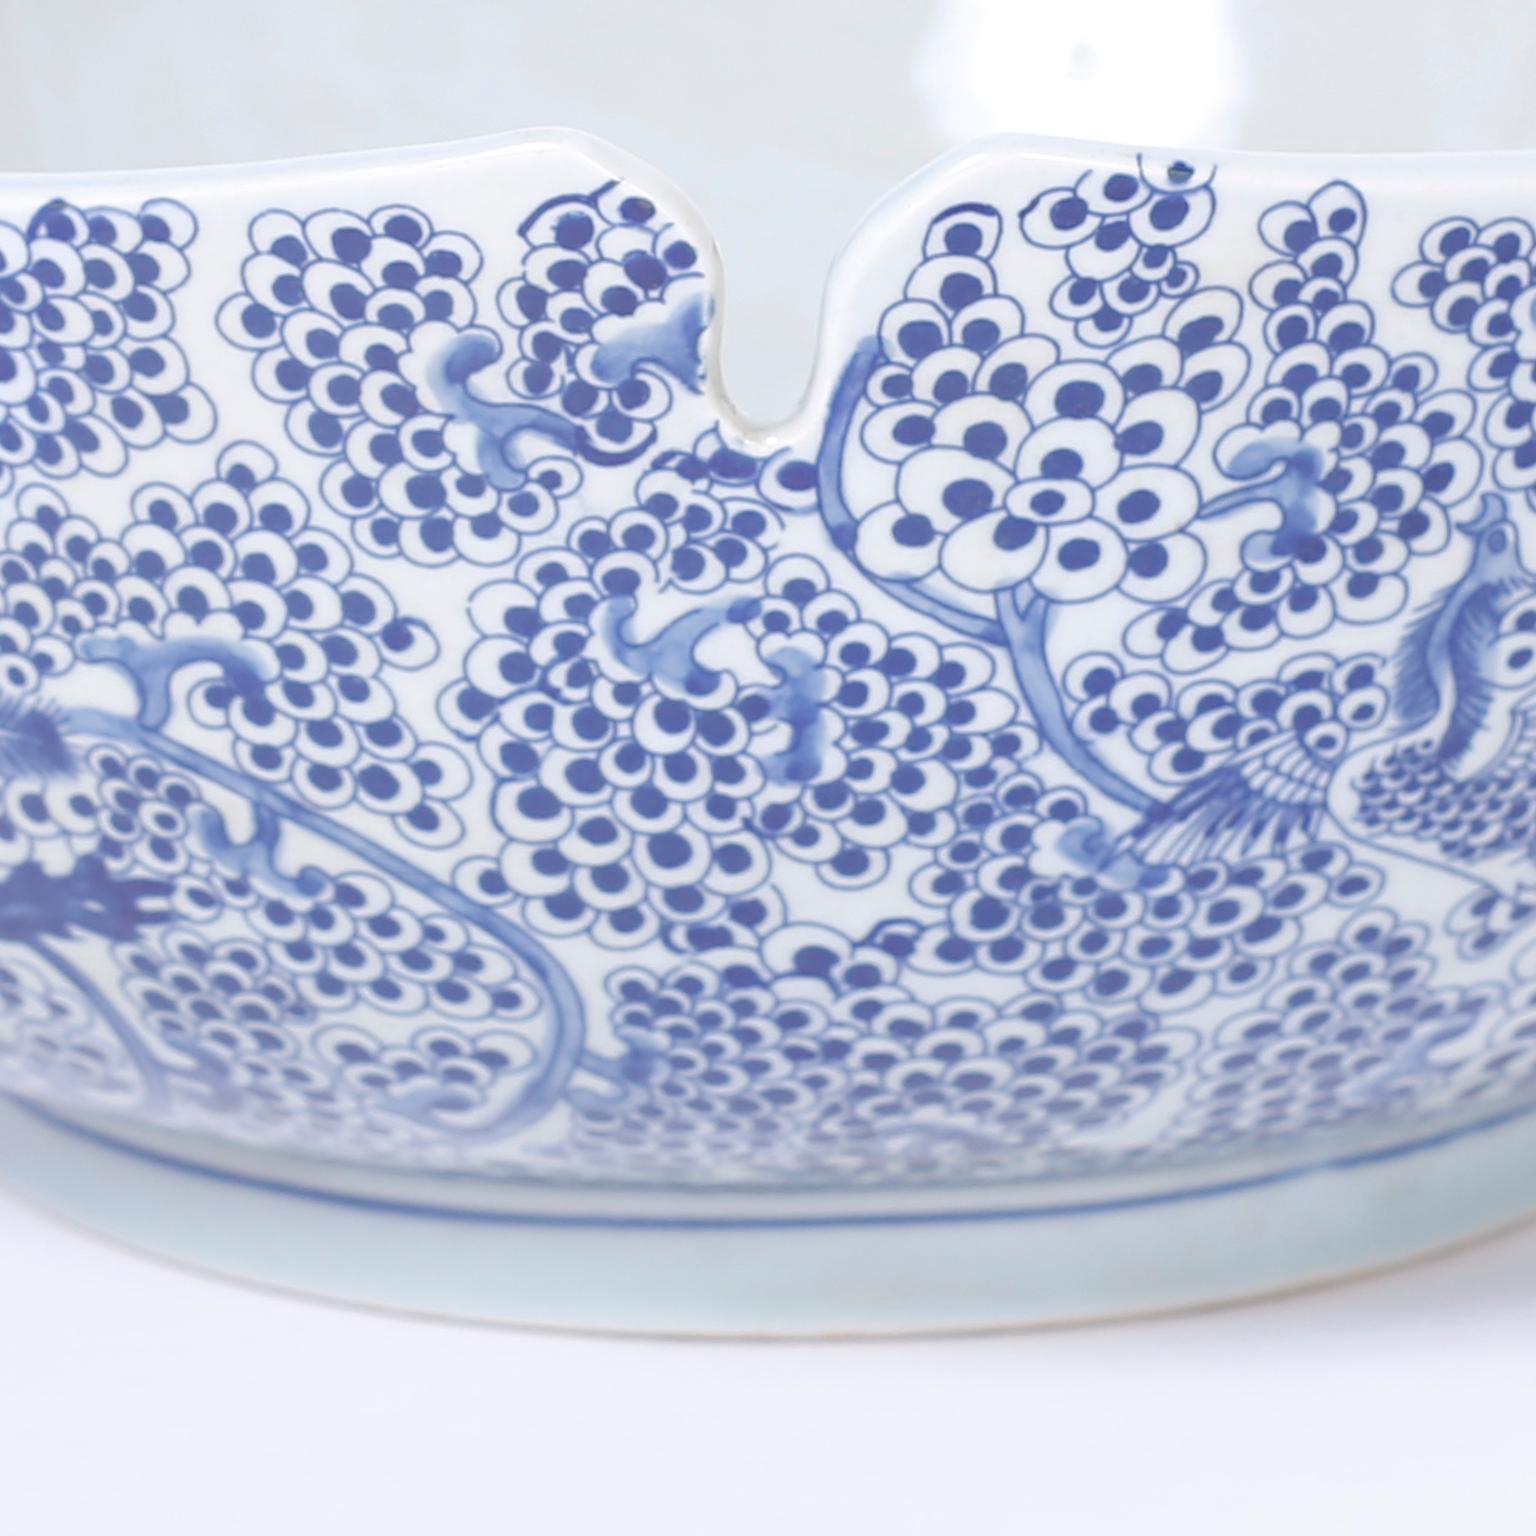 Blue and White Porcelain Fruit Bowl im Zustand „Gut“ in Palm Beach, FL